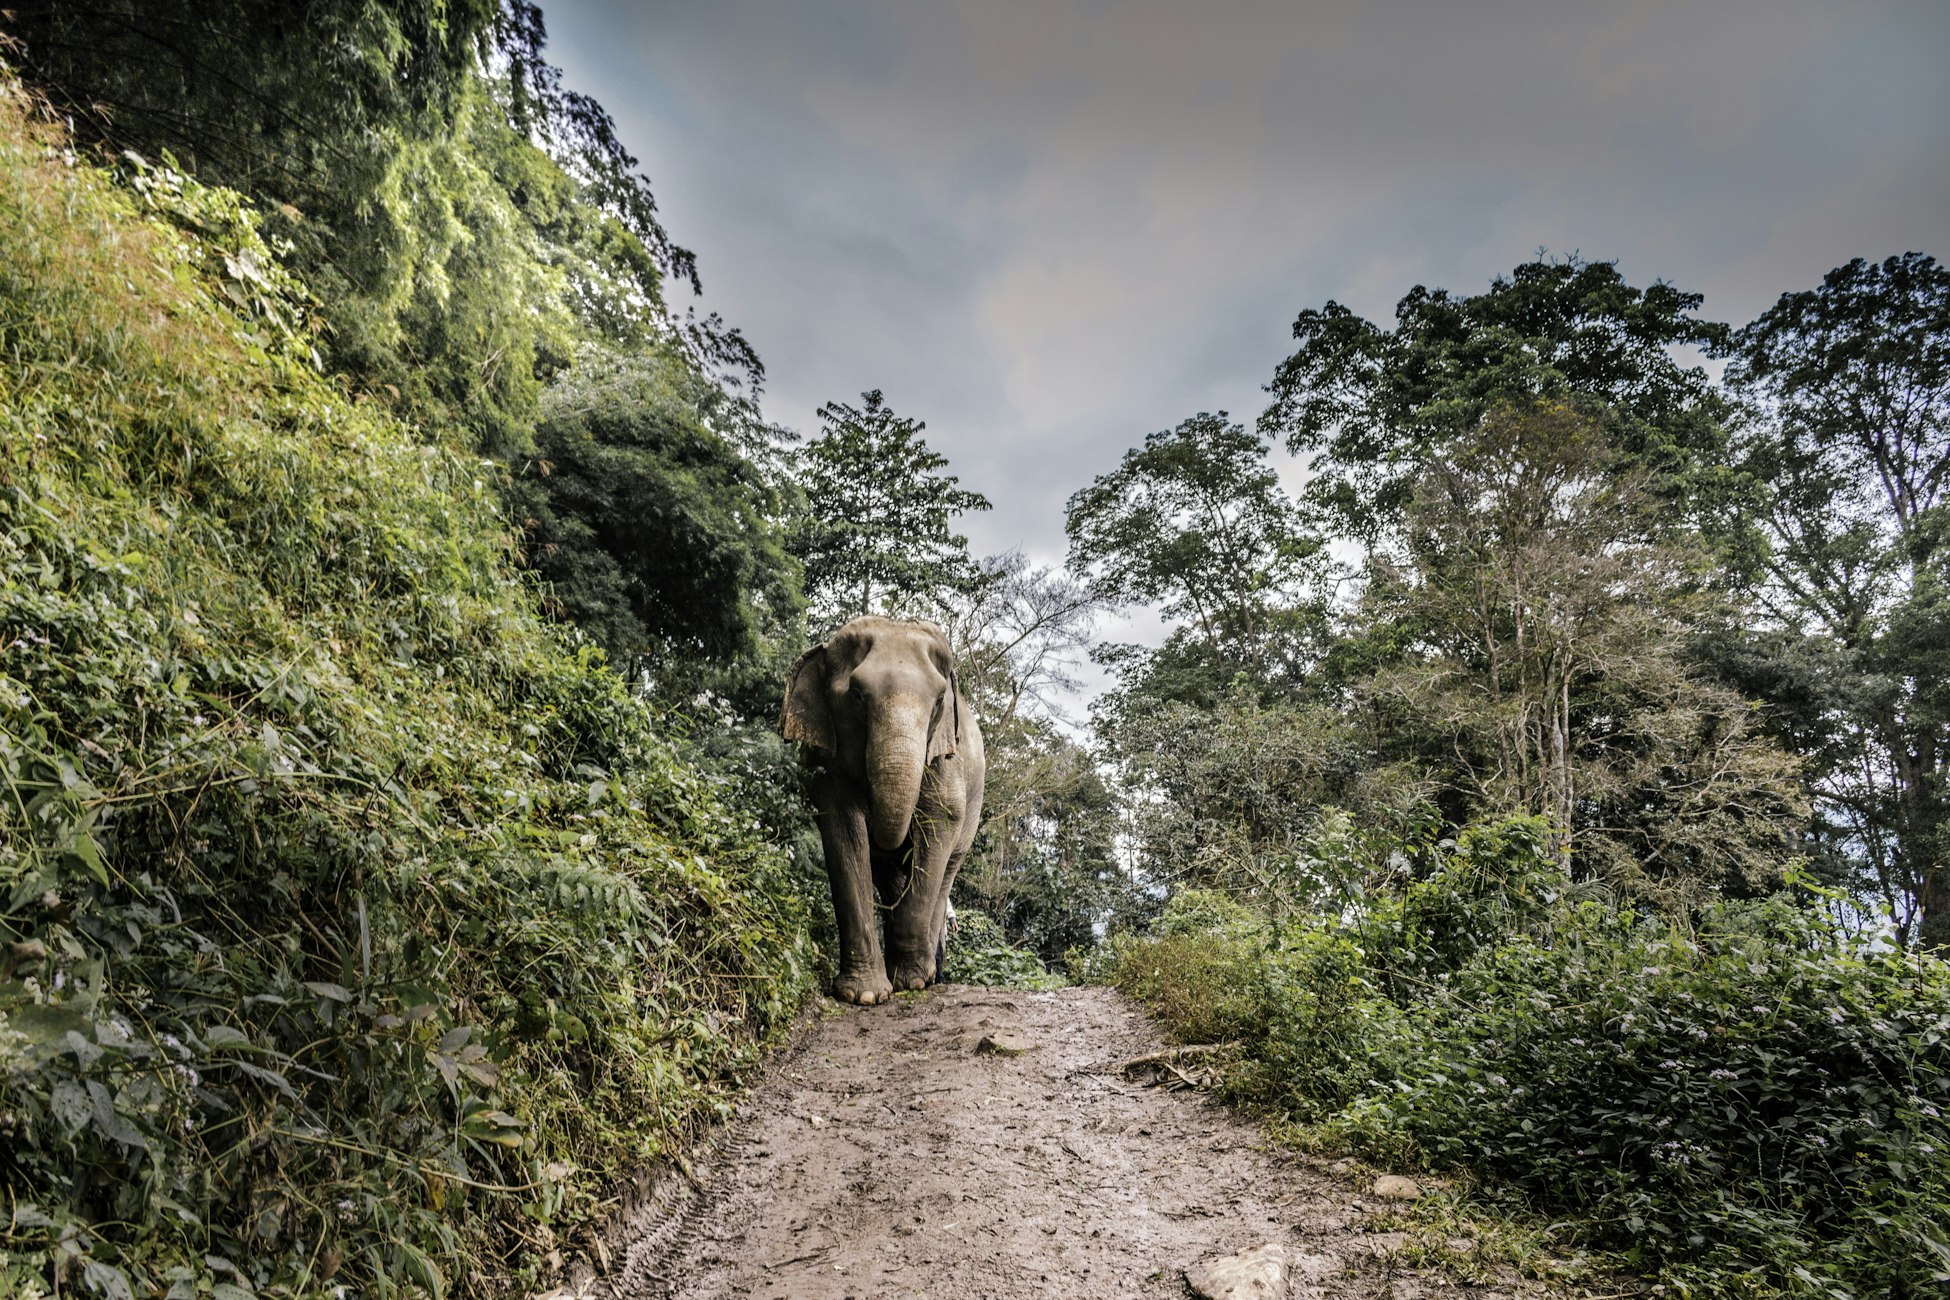 Picture of an elephant roaming around the lush green forests found within Elephant Nature Park